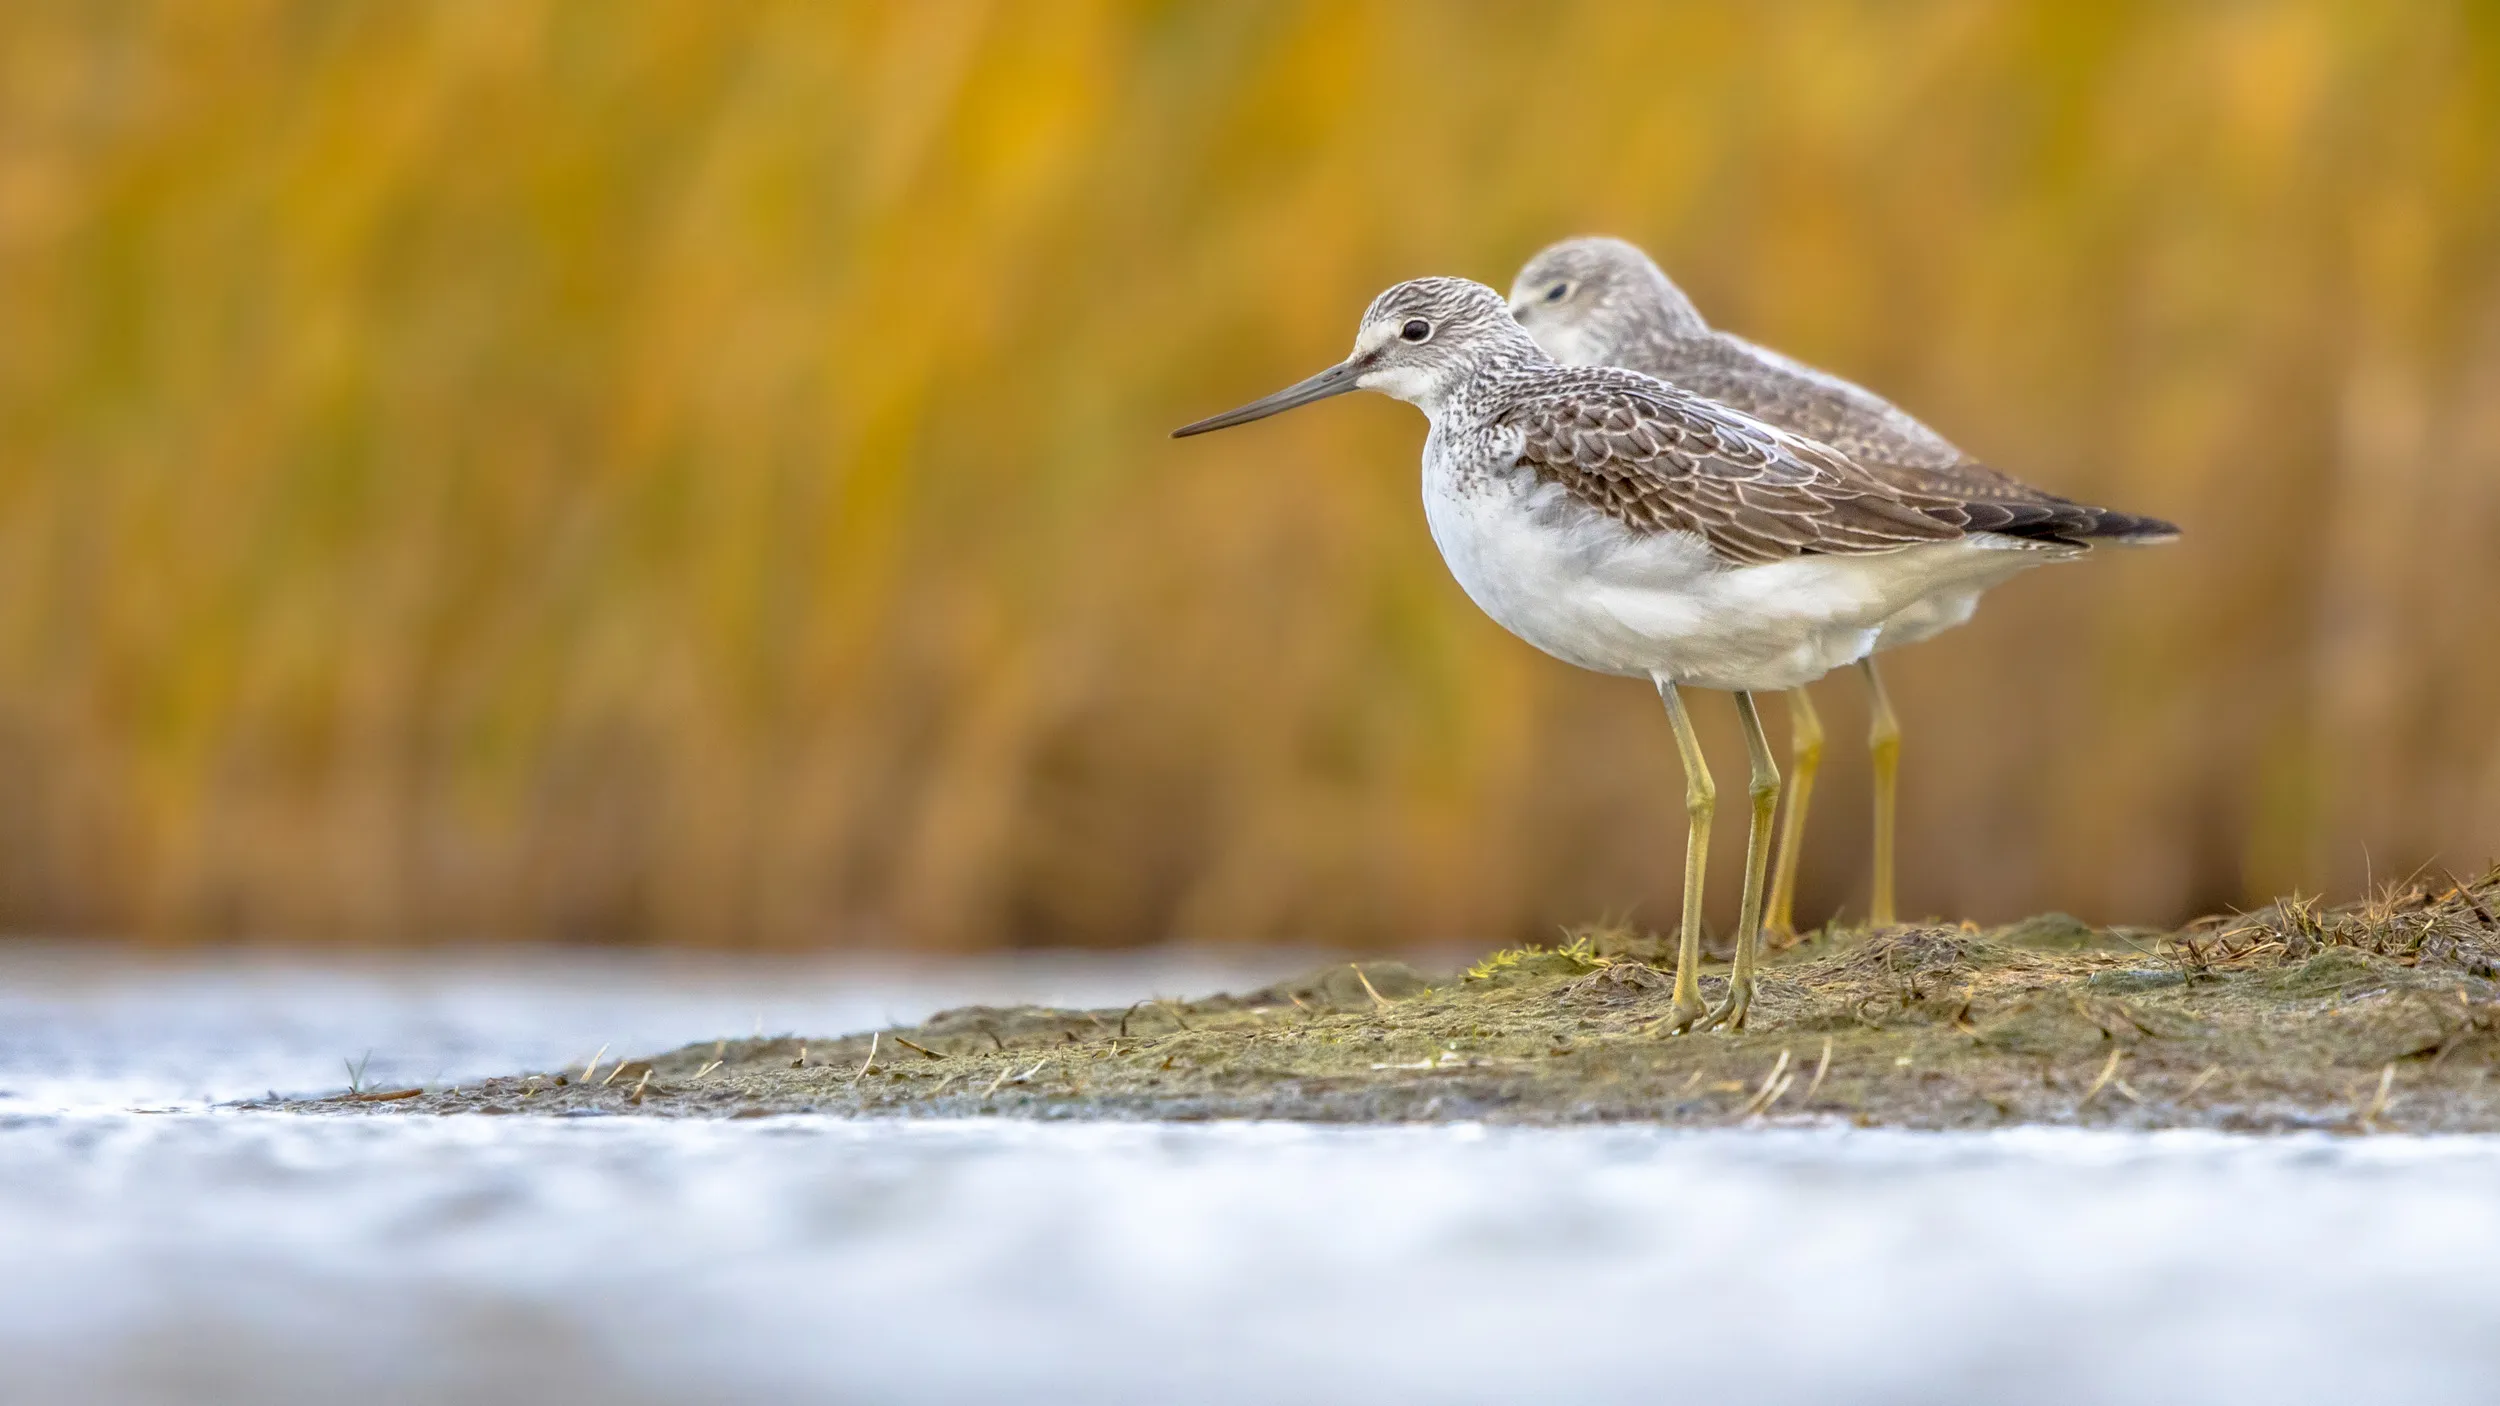 A pair of Greenshank stood on the edge of a bank, with reeds blowing in the background.